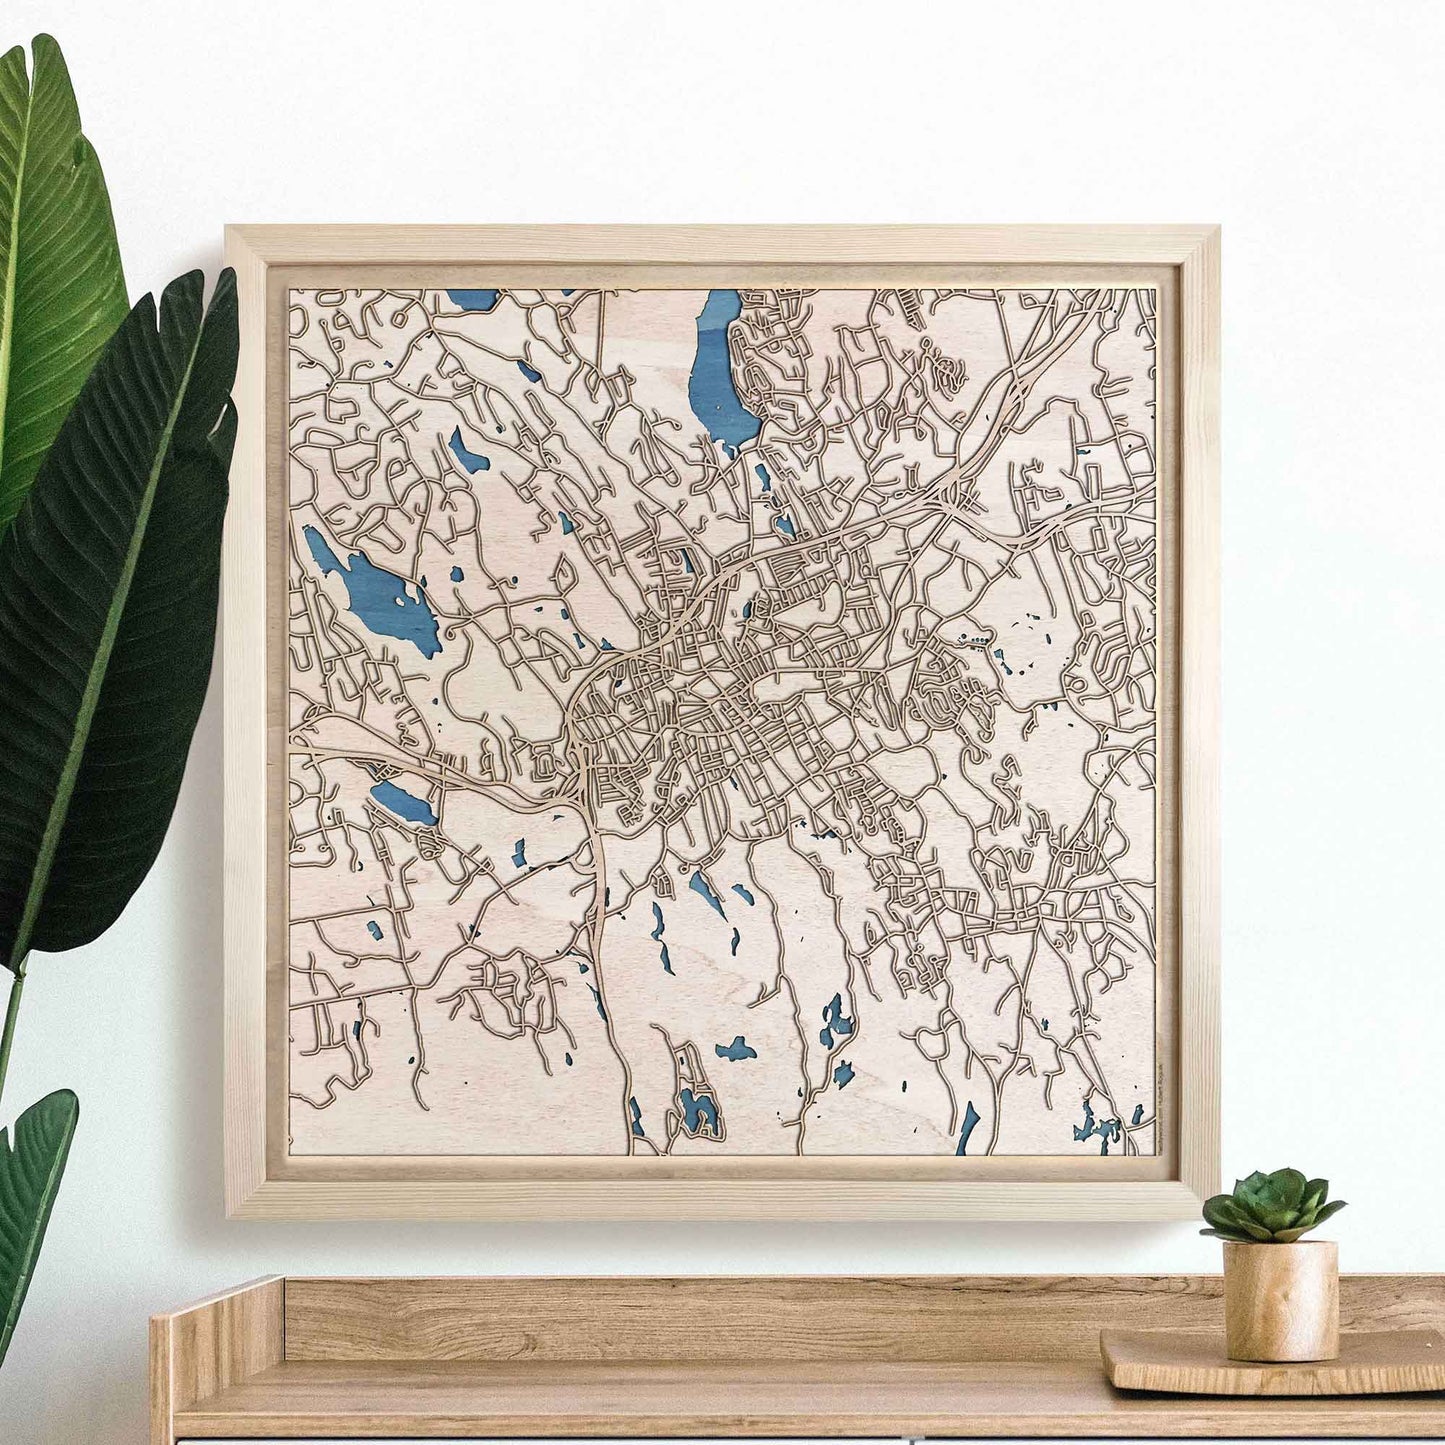 Danbury Wooden Map by CityWood - Custom Wood Map Art - Unique Laser Cut Engraved - Anniversary Gift